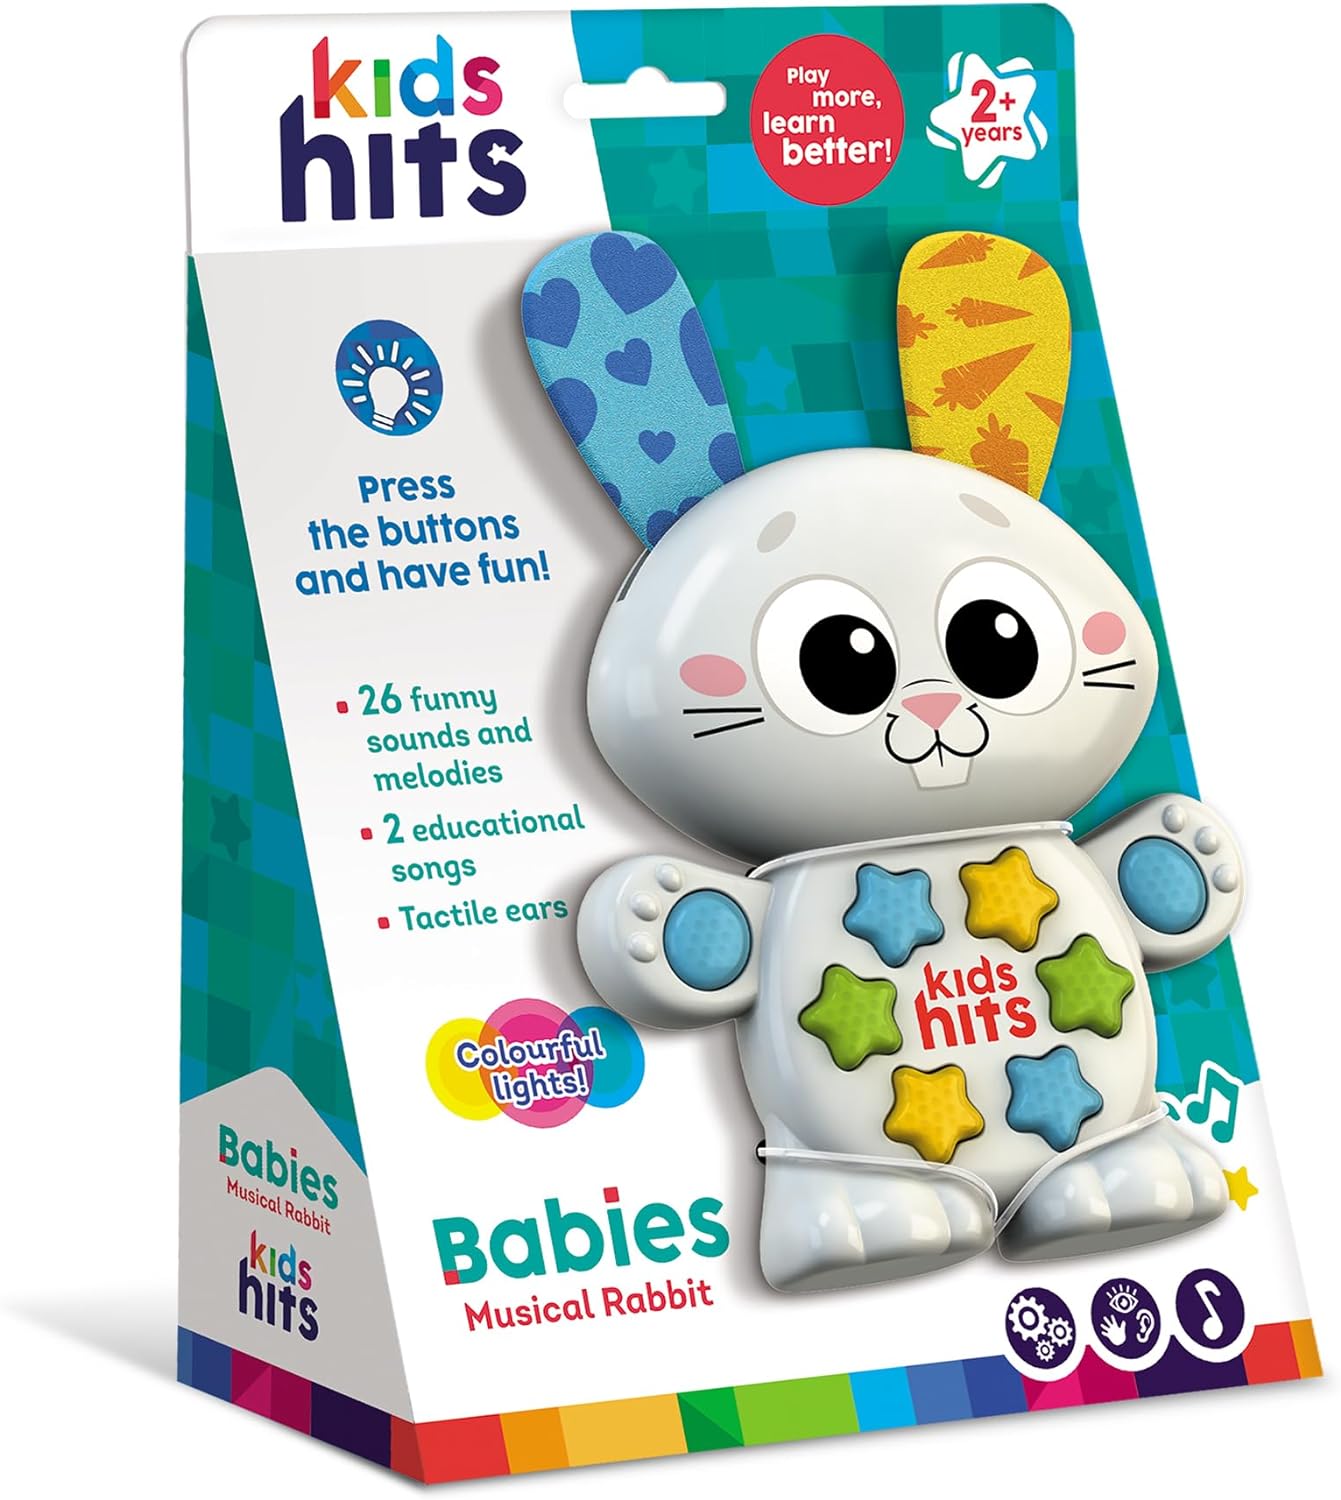 Kids Hits Babies Musical Rabbit Play More, Learn Better!